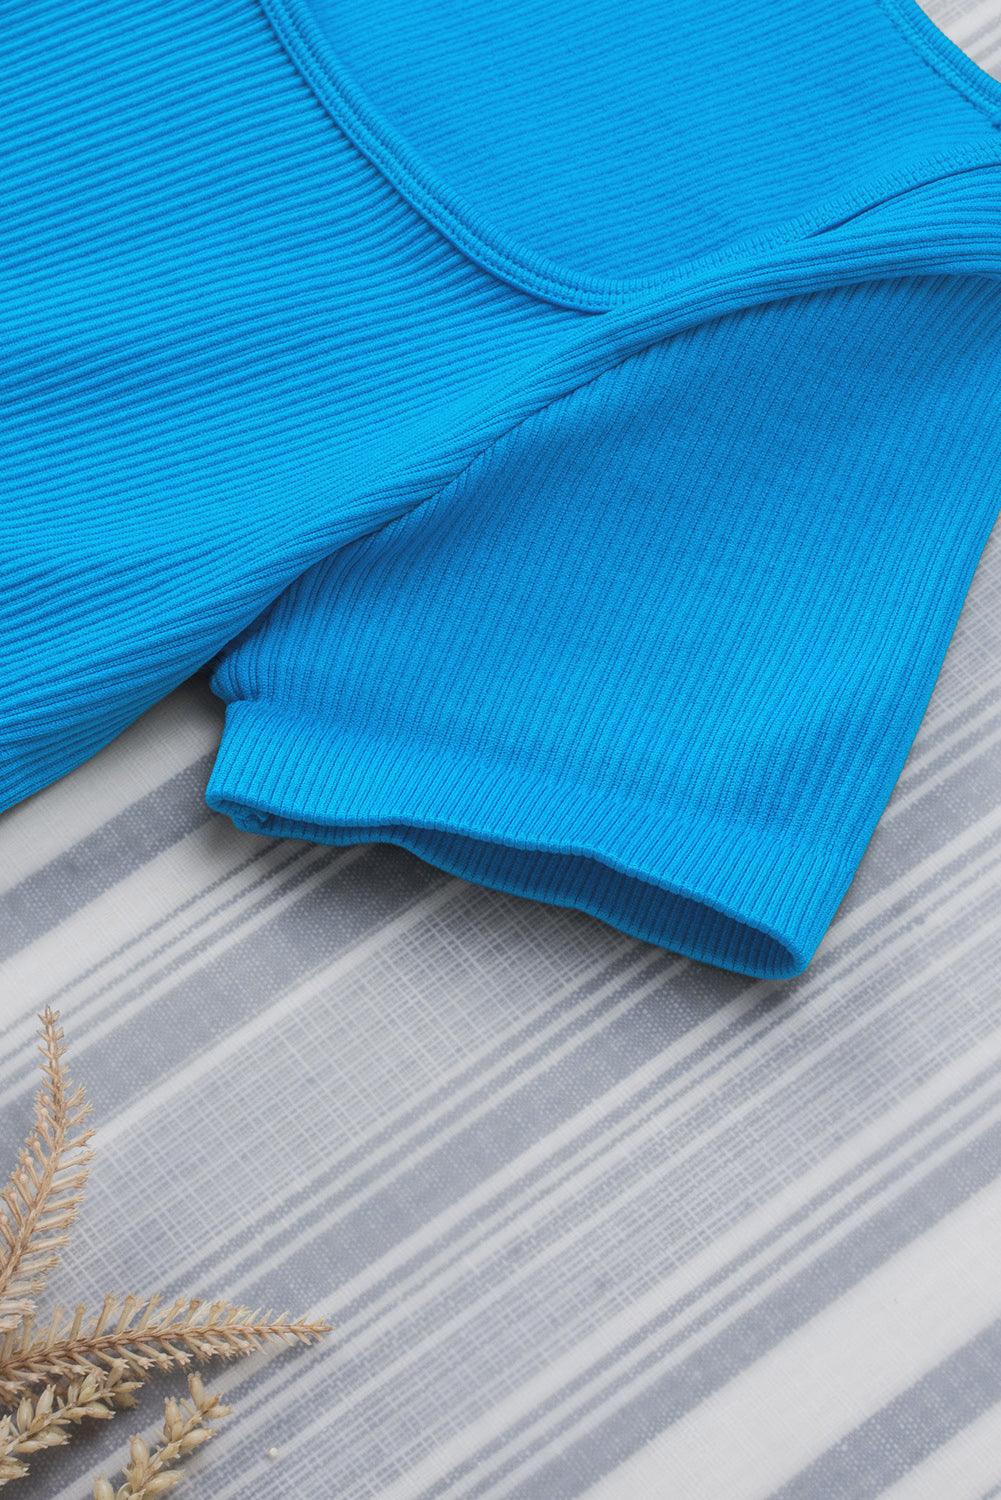 Sky Blue Ribbed Square Neck Short Sleeve Athleisure Romper